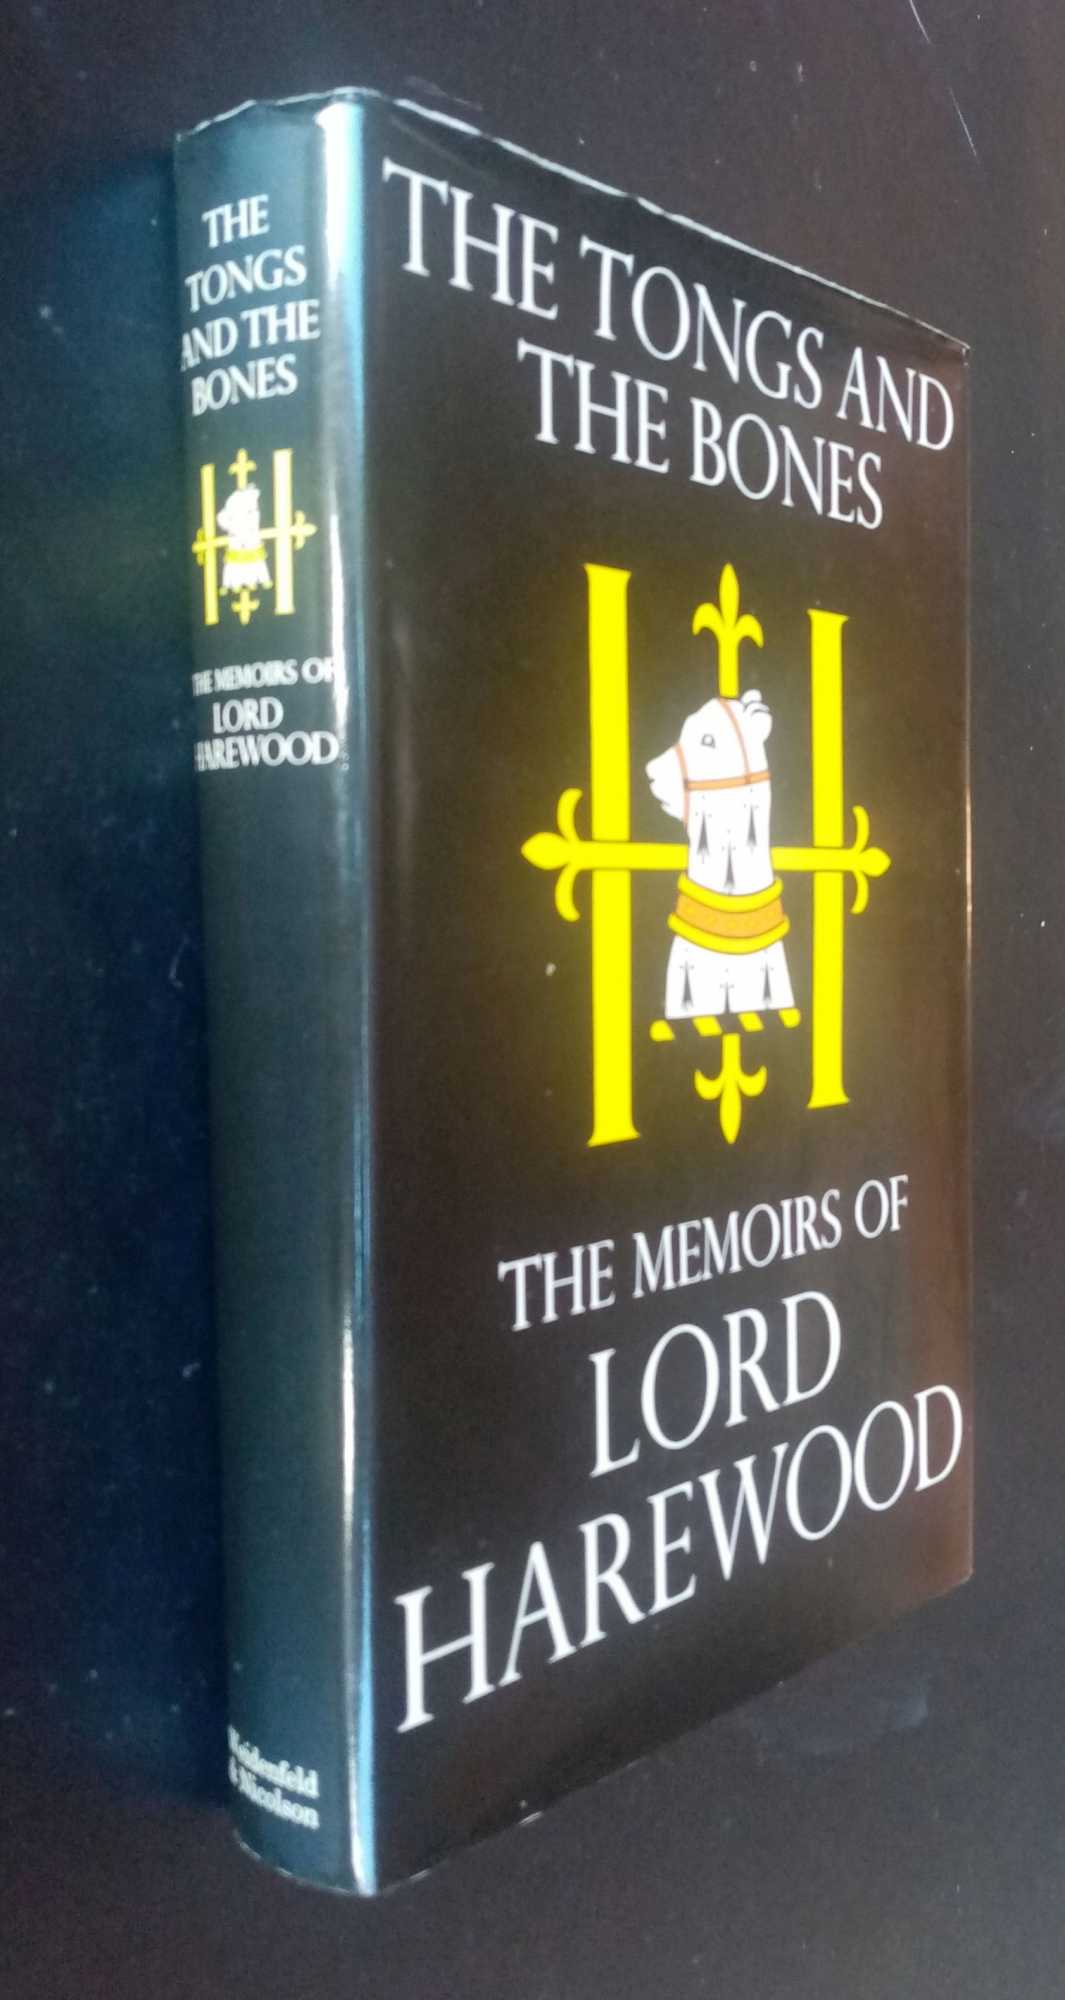 Harewood Earl of, George Henry Hubert Lascelles - The Tongs and the Bones. The Memoirs of Lord Harewood    SIGNED